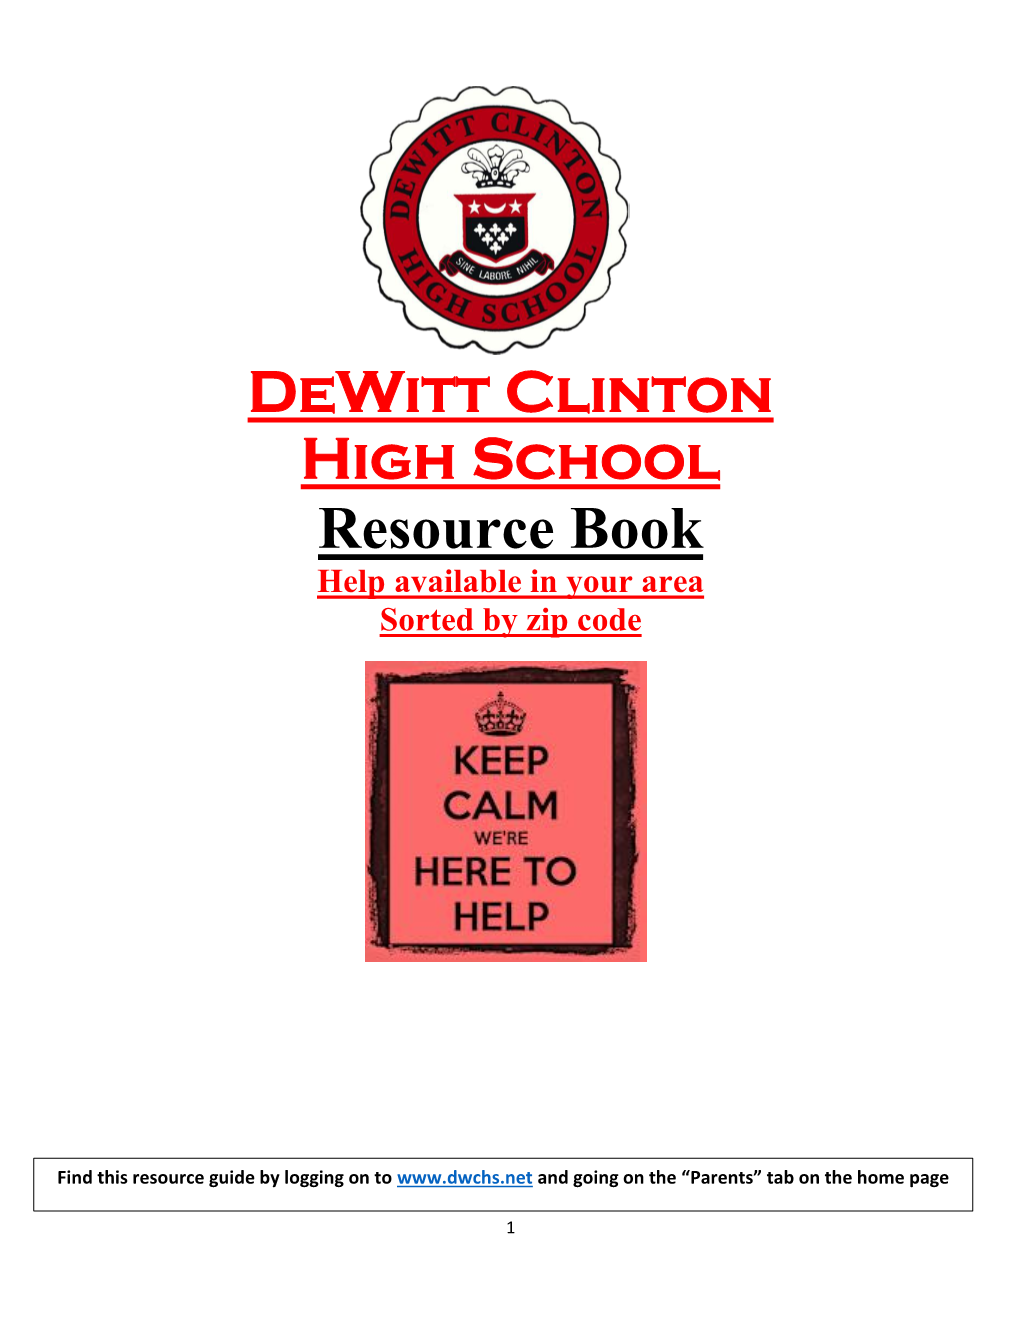 Dewitt Clinton High School Resource Book Help Available in Your Area Sorted by Zip Code